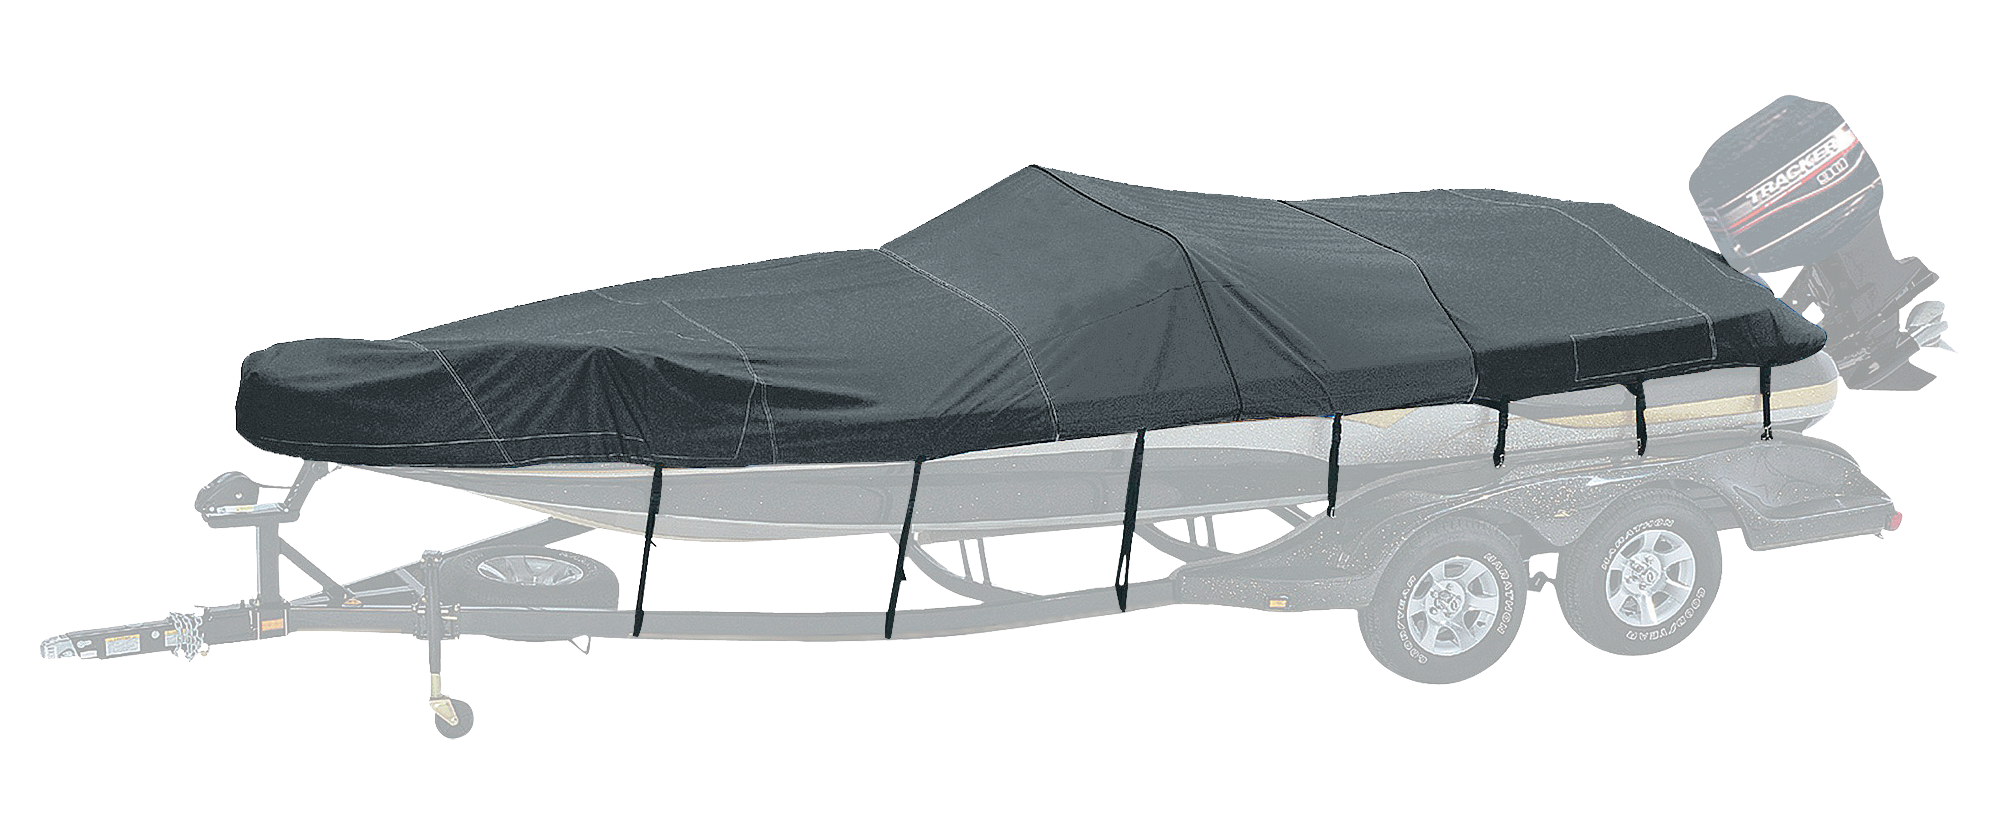 Bass Pro Shops Exact Fit Custom Boat Cover by Westland for TRACKER Models - 2002-03 Super Guide V-16 SC - Charcoal